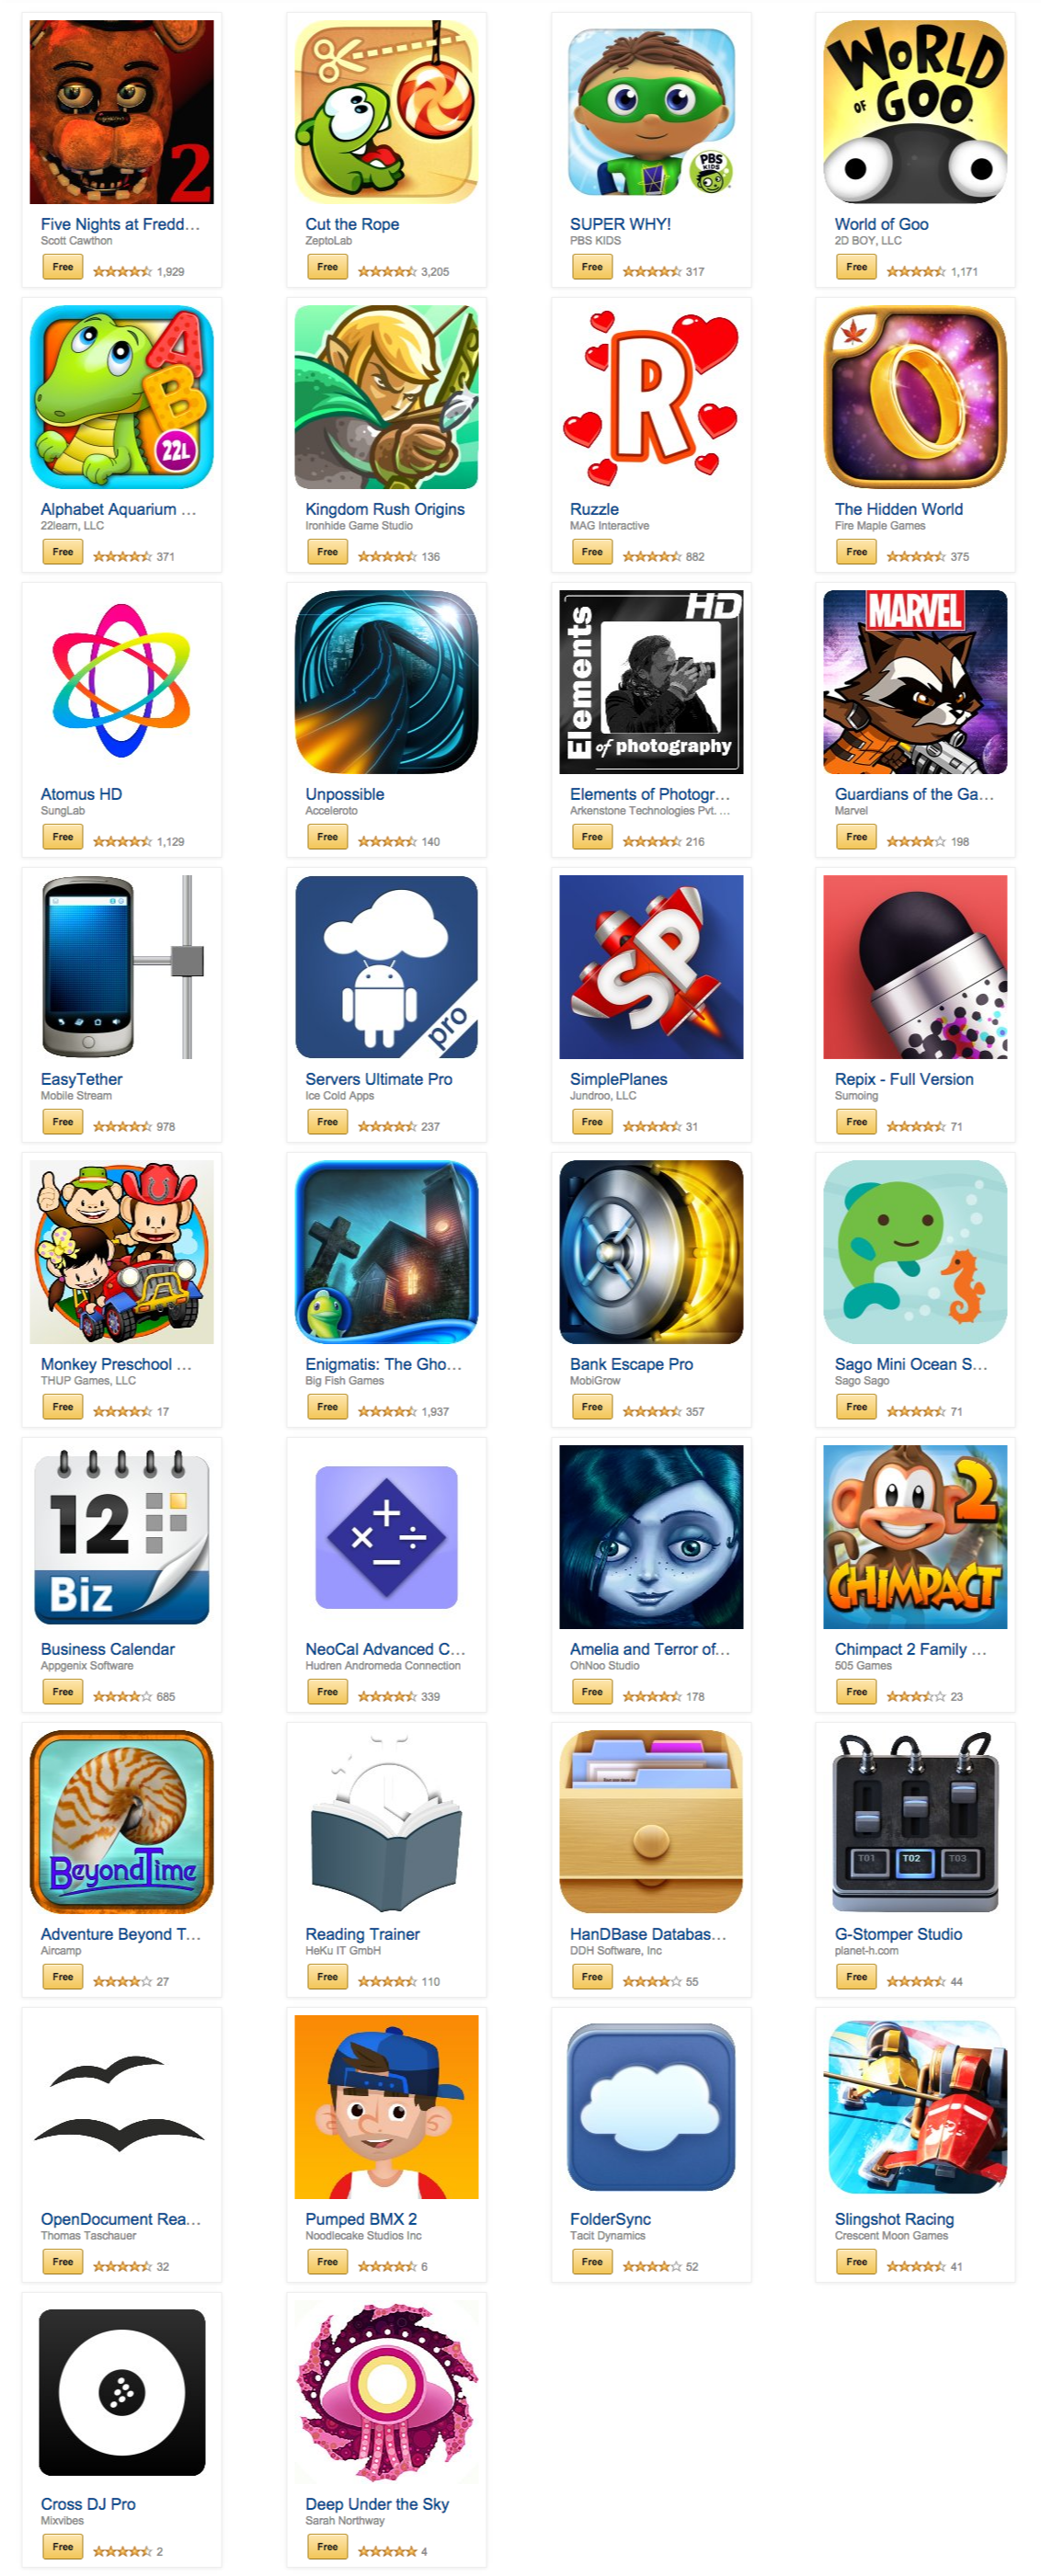 Amazon.com  Free App of the Day Bundle  Apps   Games